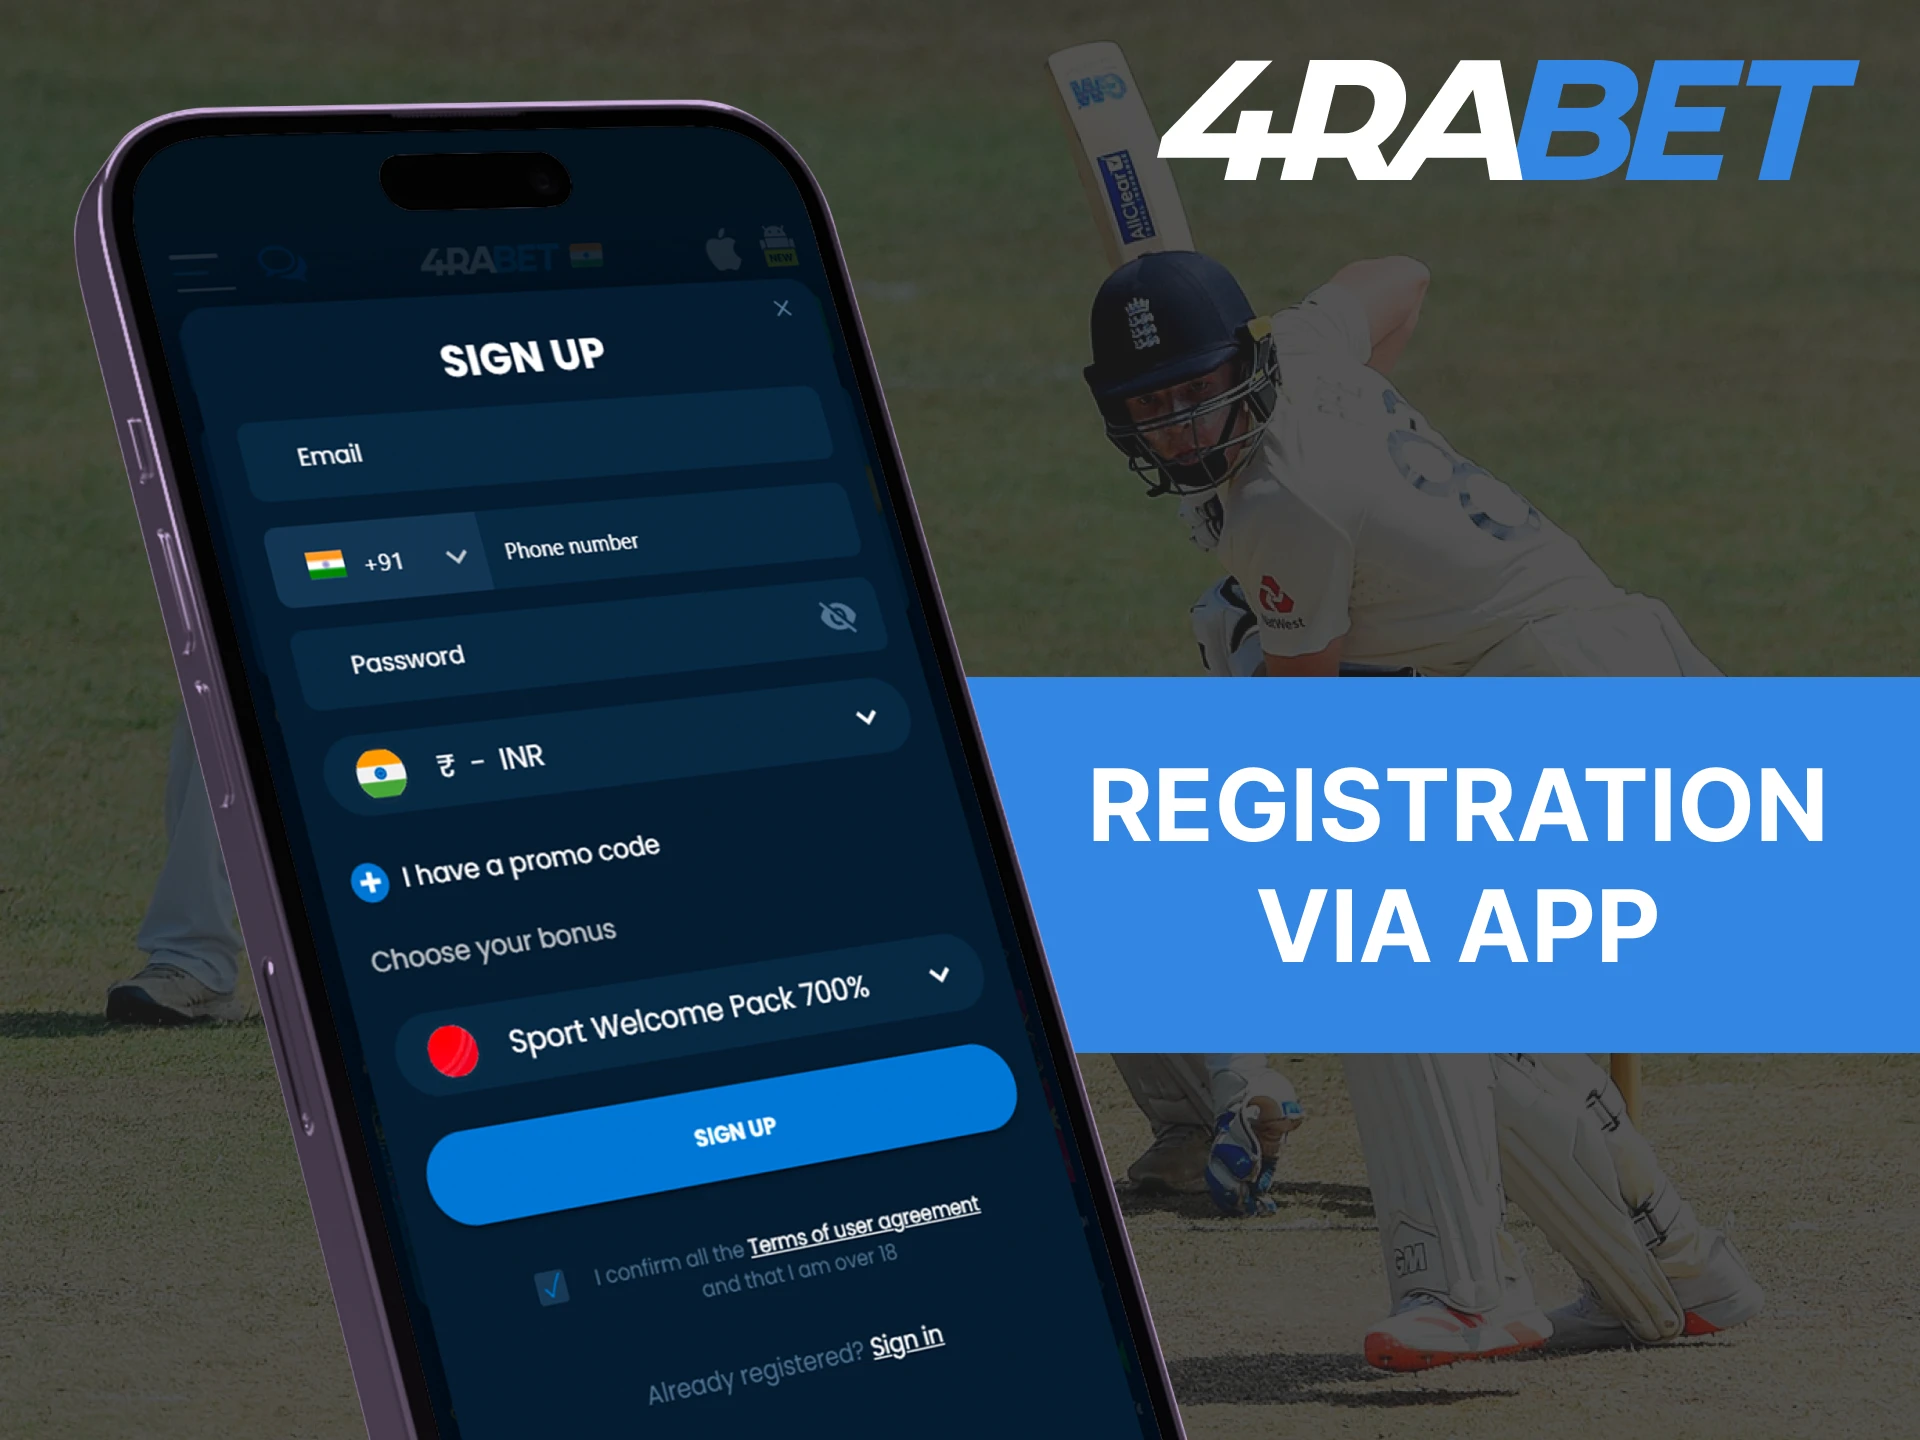 Download and register with the 4RaBet mobile app to start betting.